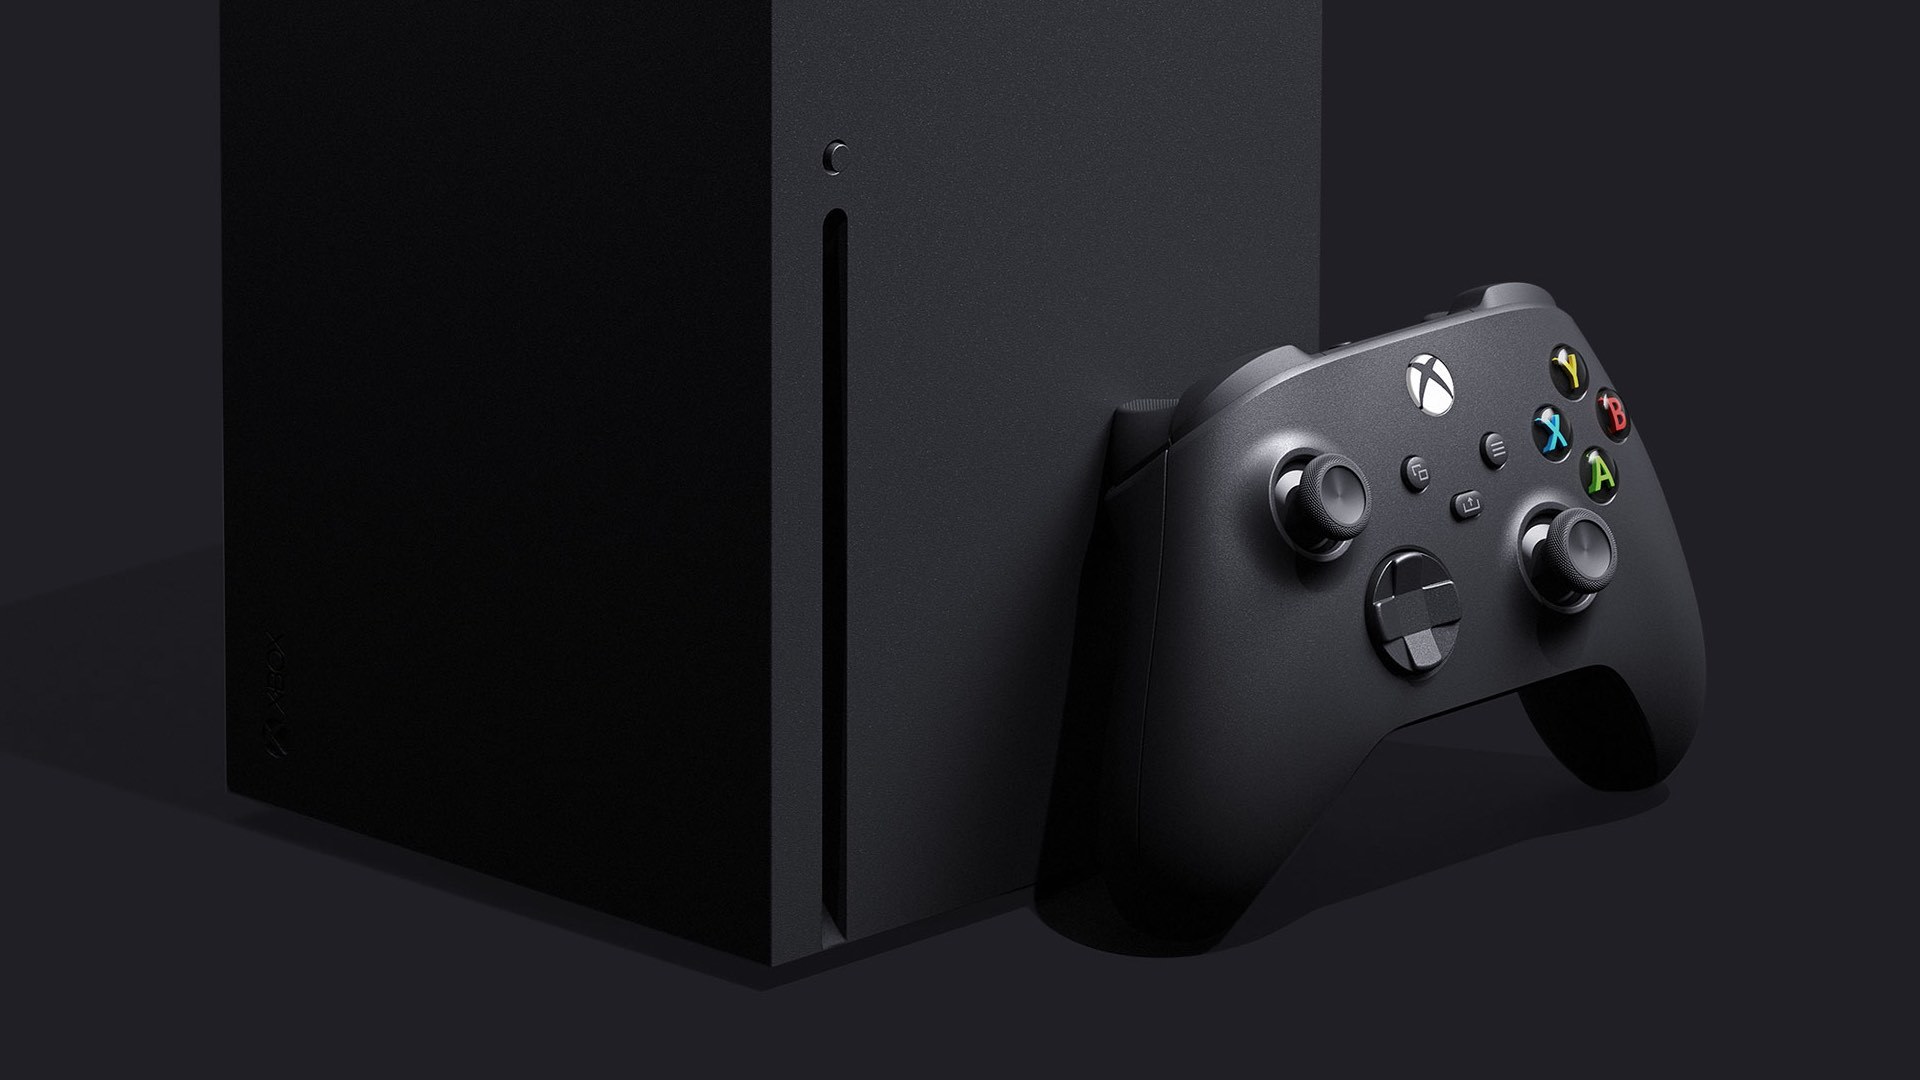 Unthinkable Drought pulse Xbox Series X Specs: Twice As Powerful As Xbox One X - GameSpot